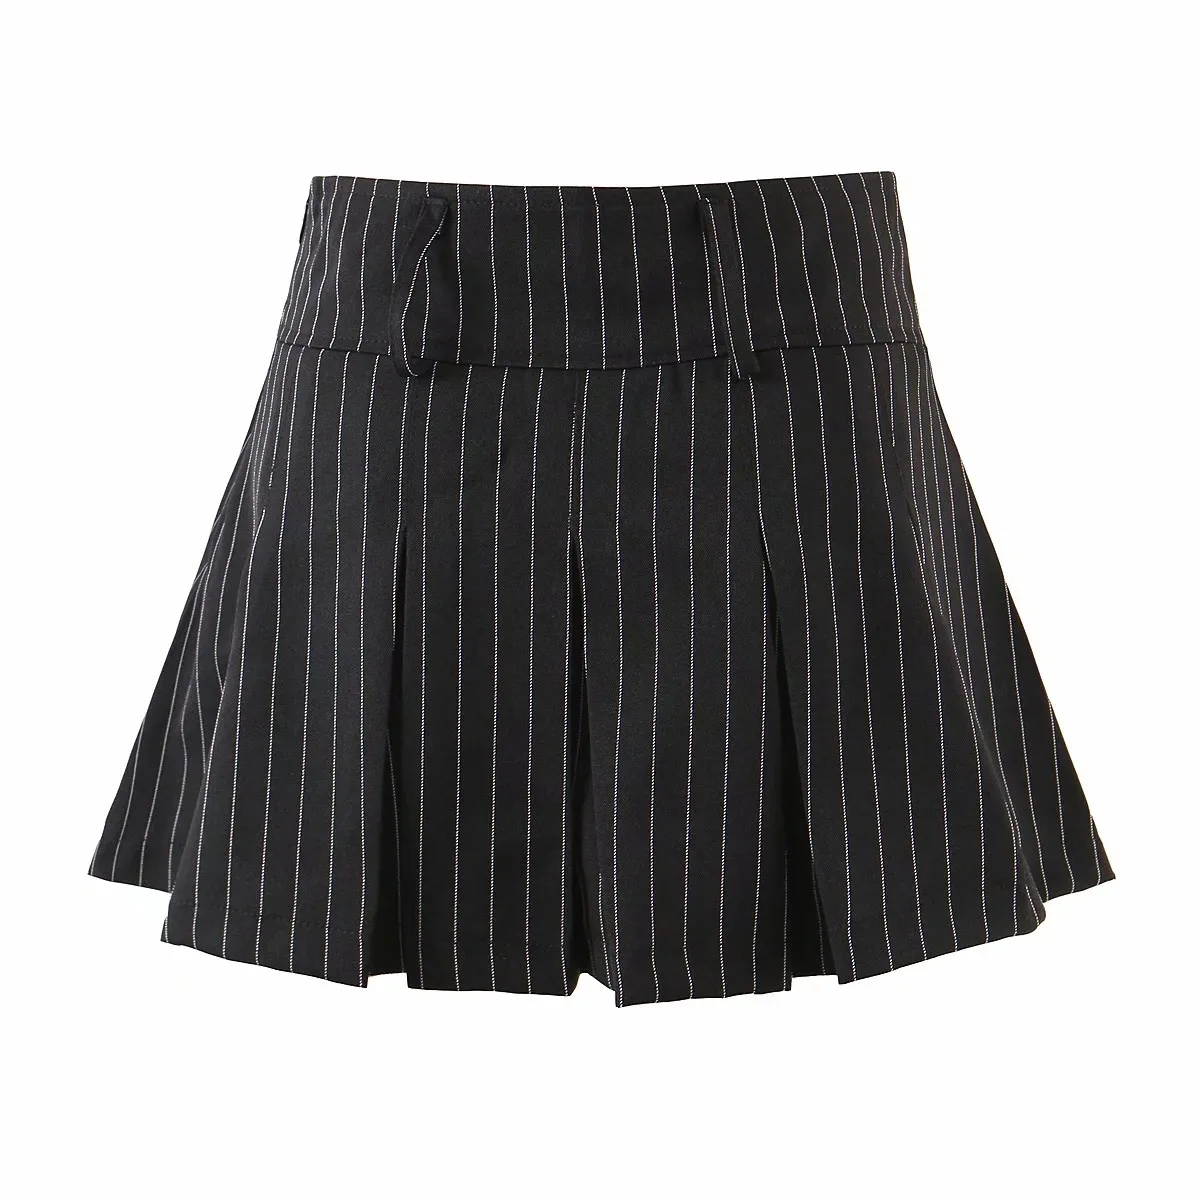 Vintage College Style Sexy High Waist Striped Pleated Skirt Woman Slim Fit Kawaii Short Mini Skirt For Girl Spring Summer